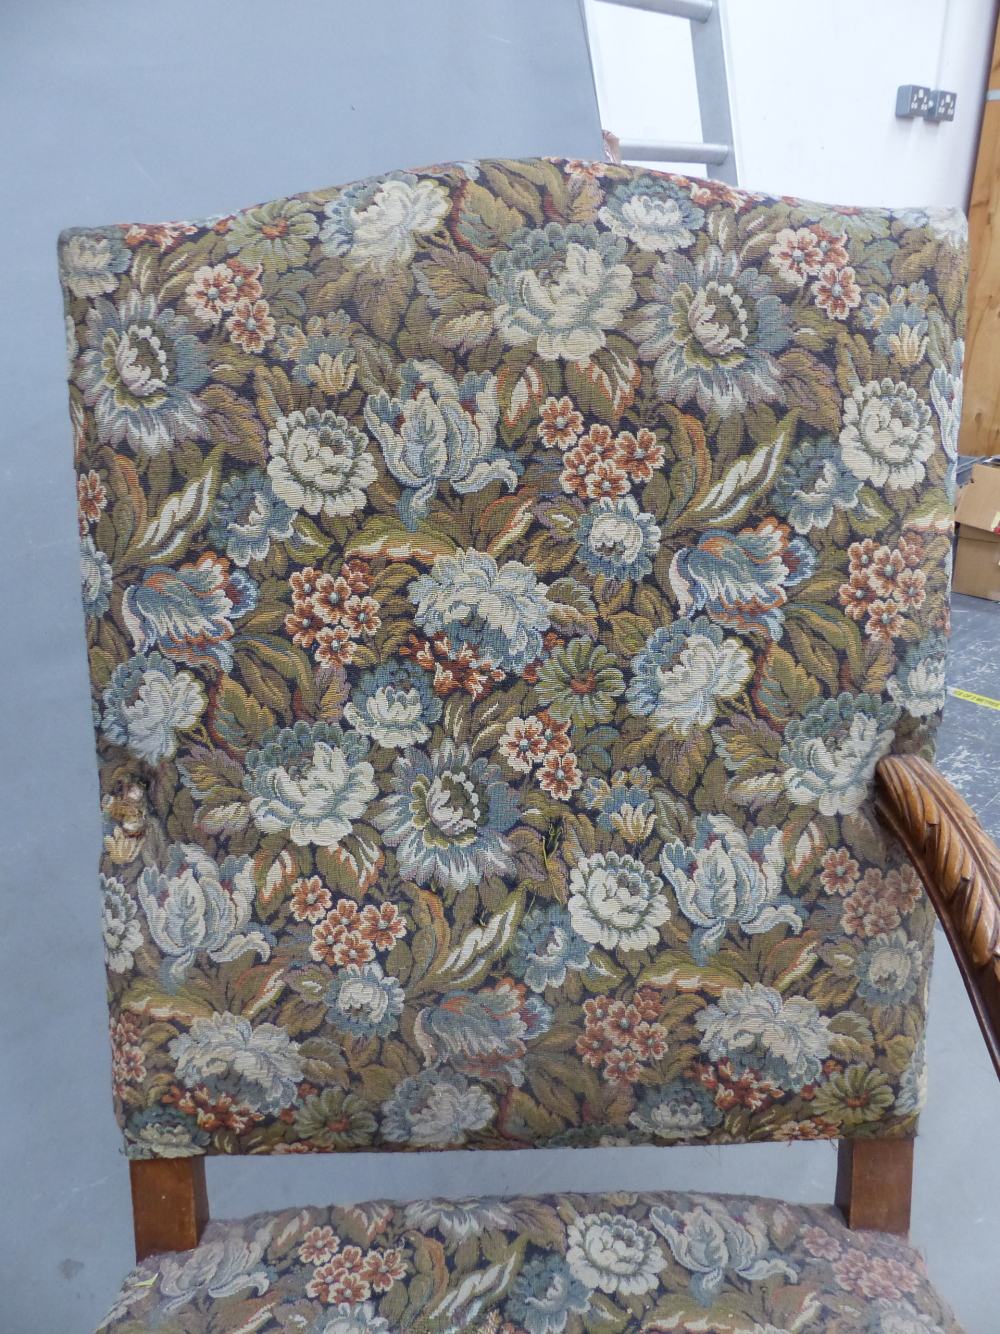 A CHARLES II STYLE BEECH WOOD ELBOW CHAIR WITH FLORAL UPHOLSTERED RECTANGULAR BACK AND SEAT - Image 5 of 9